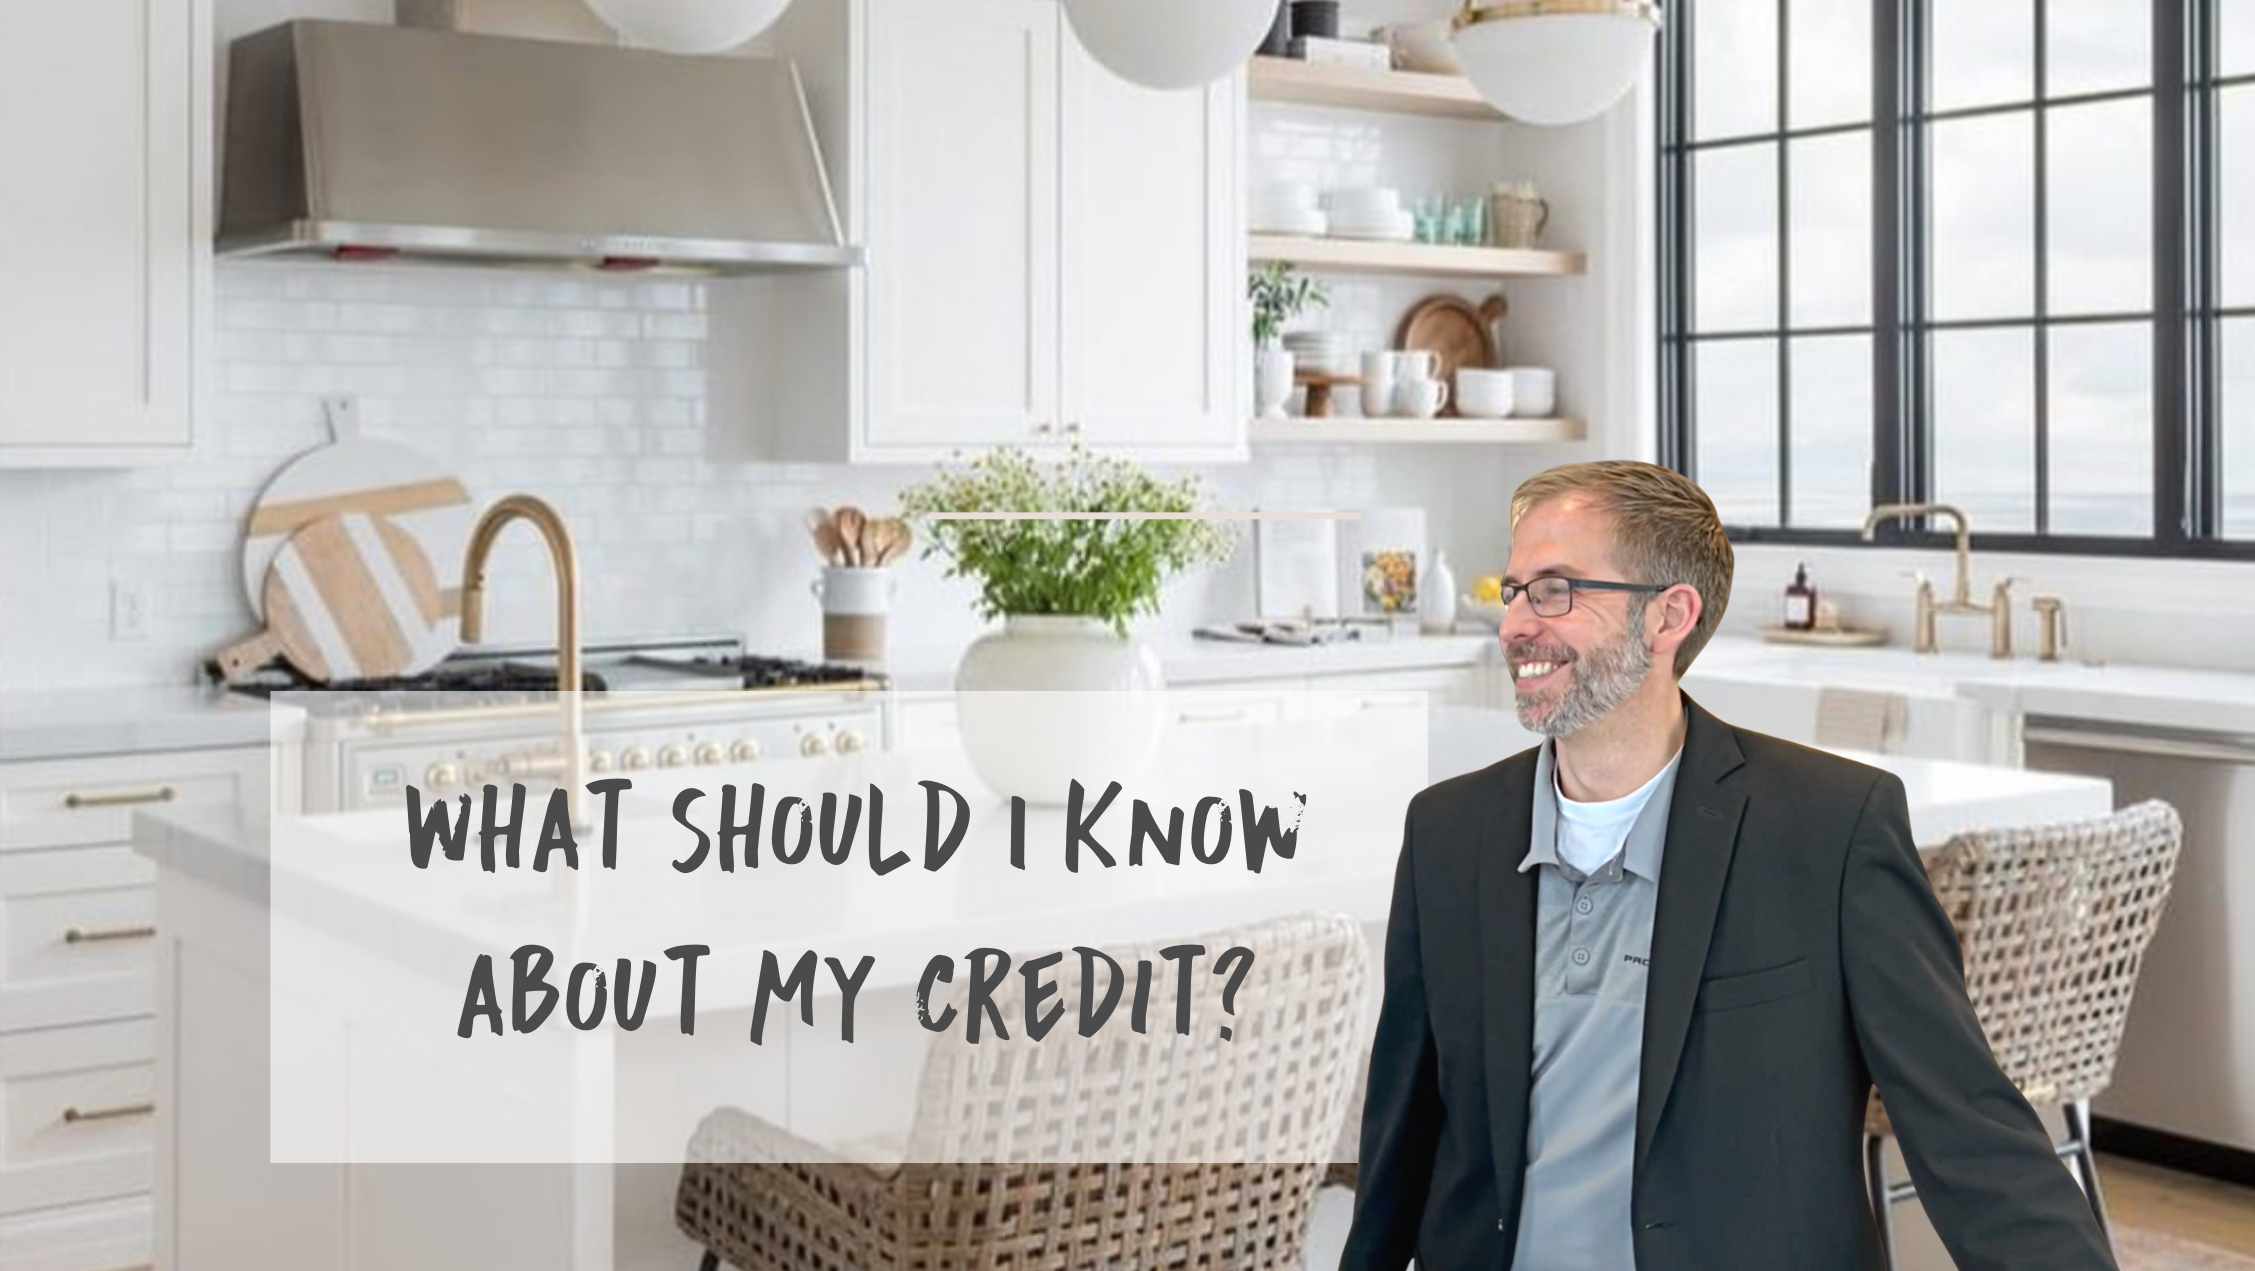 Video tutorial link with Jeremy explaining what to know about credit.